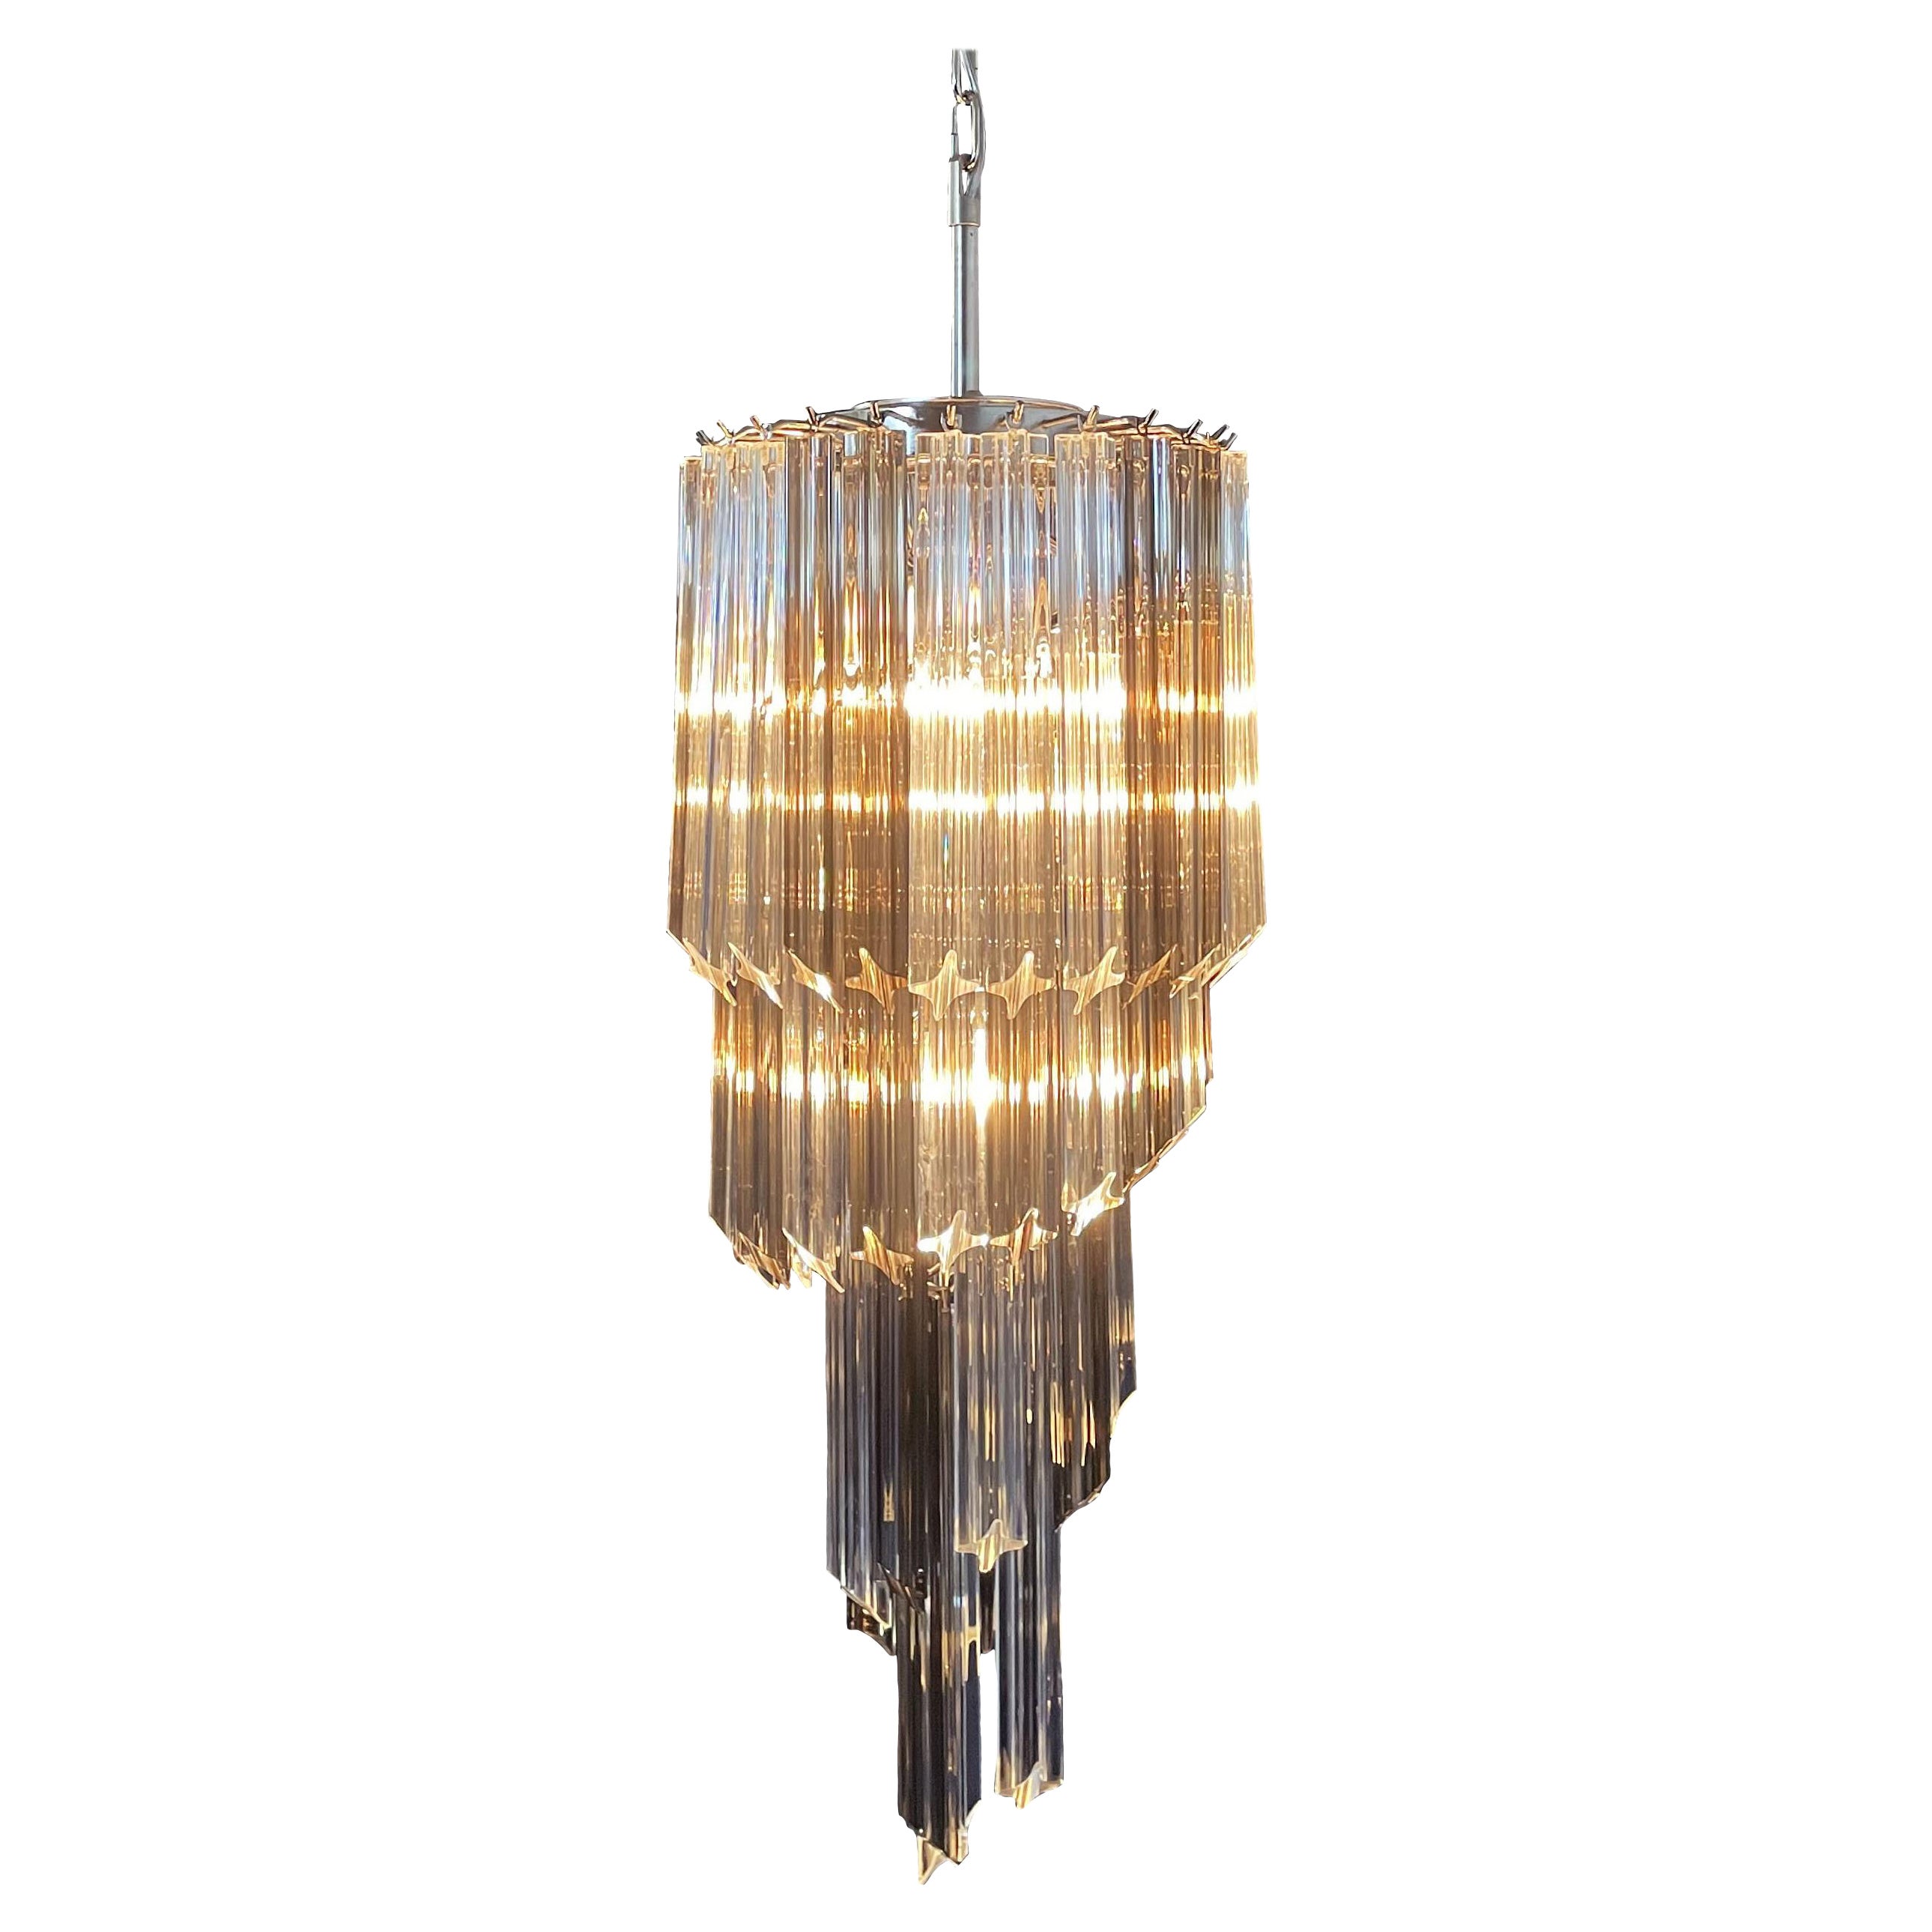 Sophisticated Murano Chandelier – 54 quadriedri prisms transparent and smoked